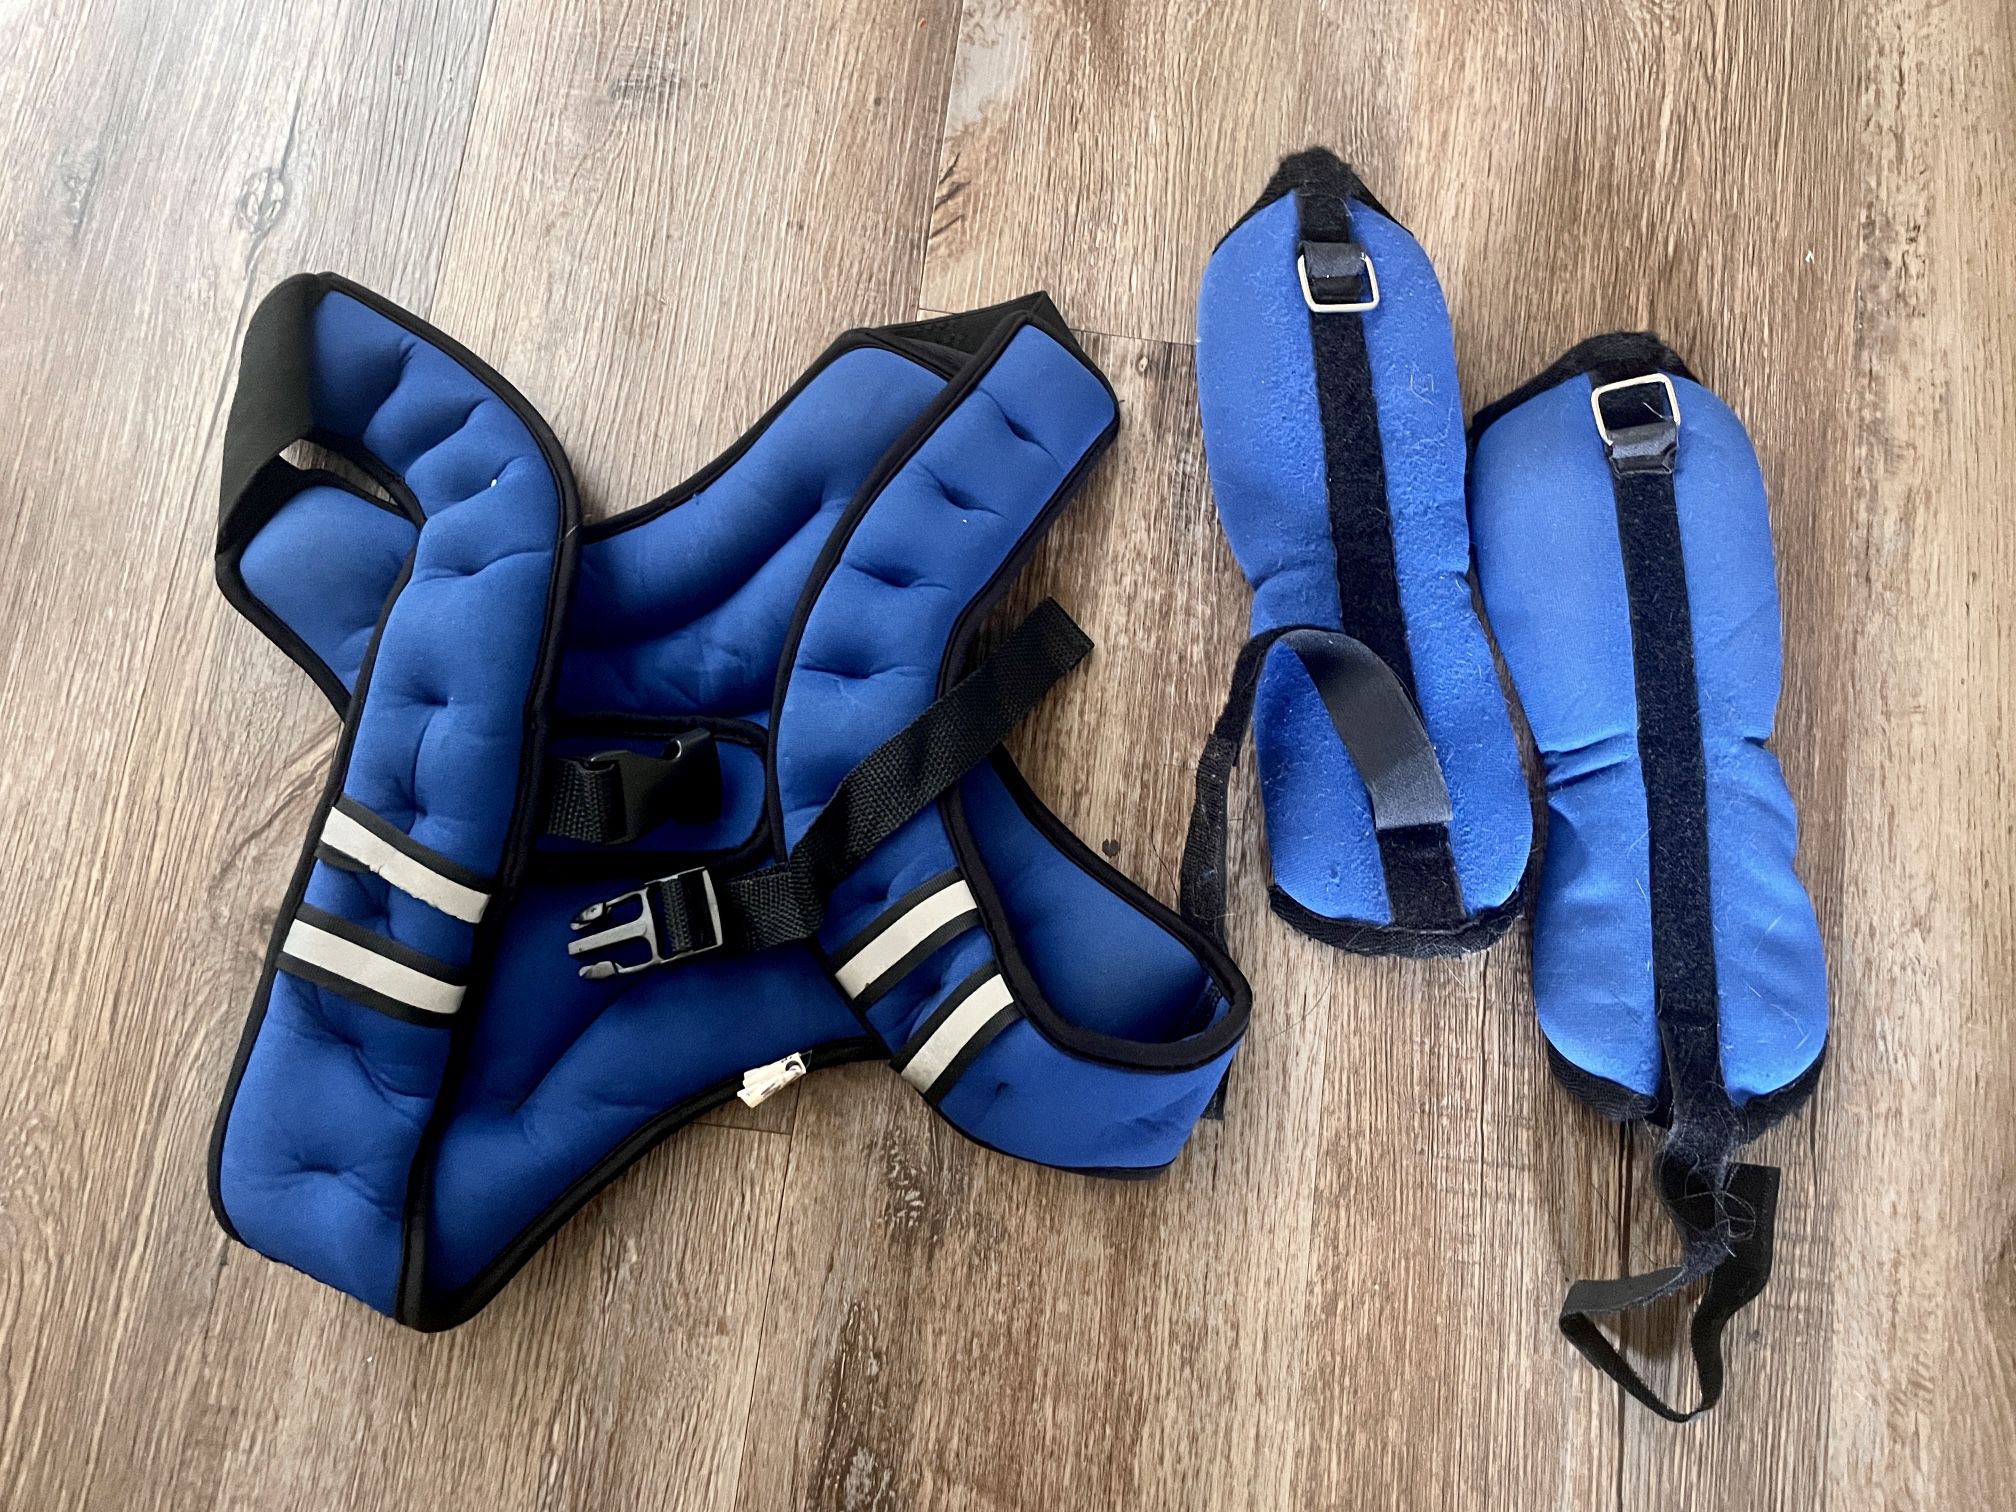 Weighted Vest (12lb) and Ankle Weights (2lbs)